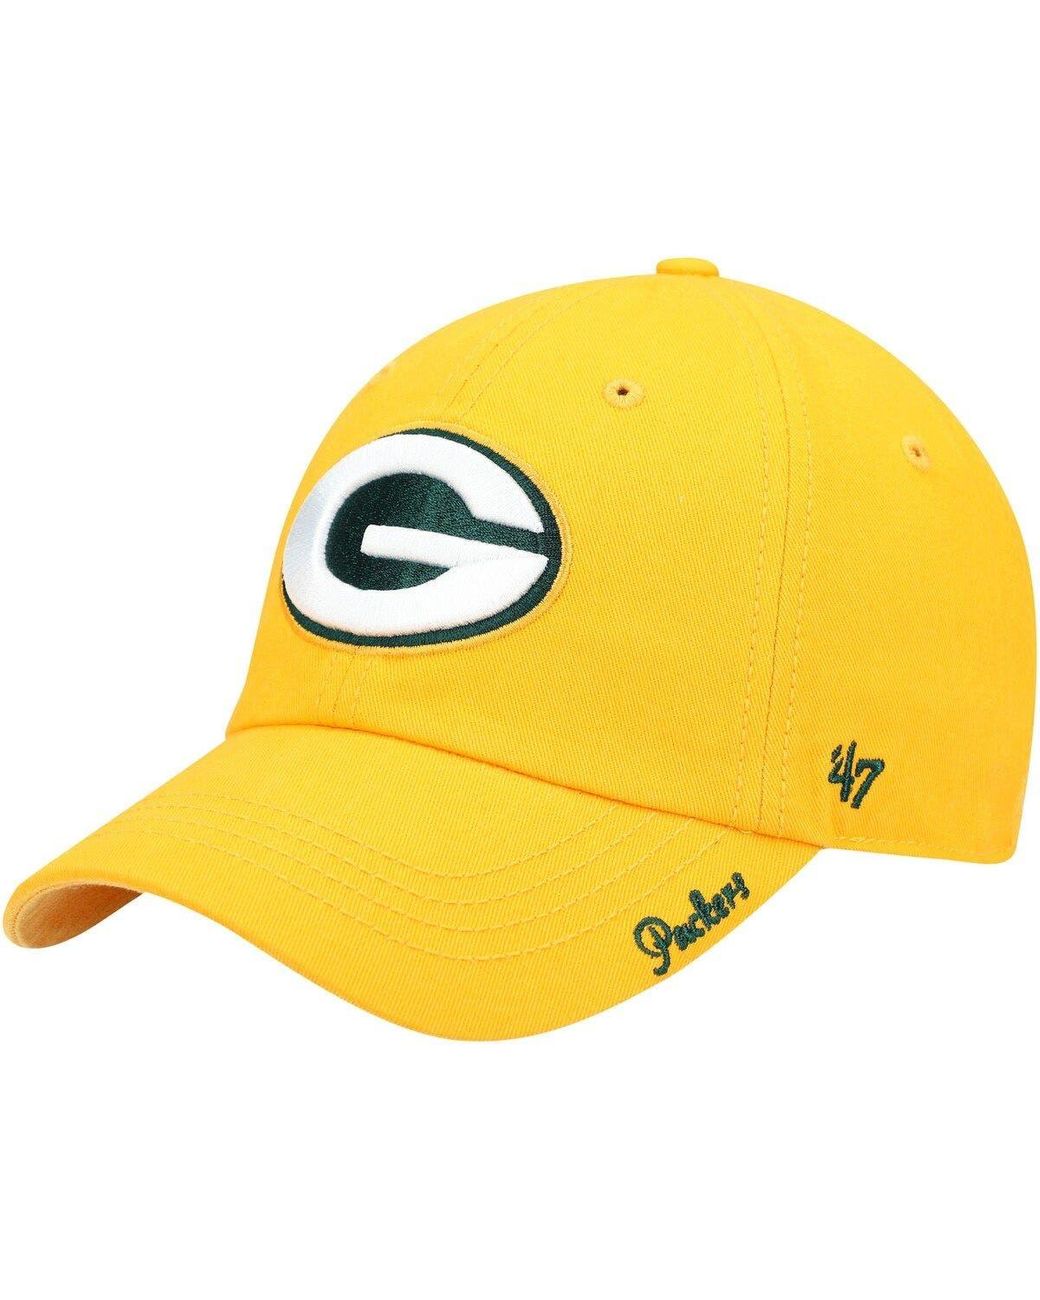 '47 Green Bay Packers Miata Clean Up Secondary Adjustable Hat At ...